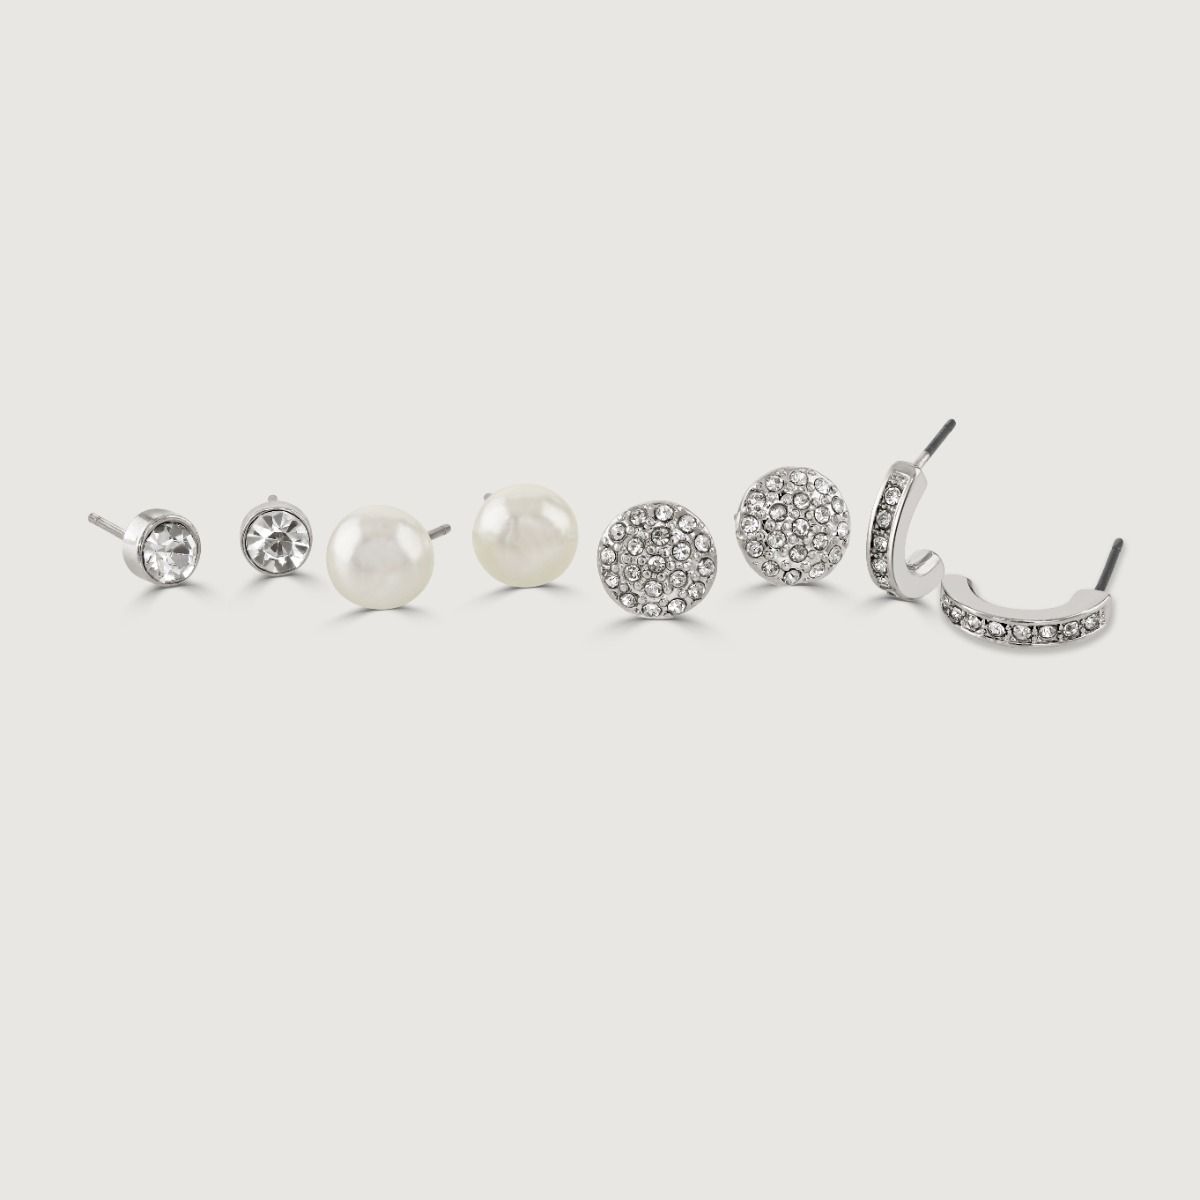 Upgrade your earring collection with this dazzling Rhodium Four Piece Pack. It features a mix of timeless elegance and contemporary flair, including pearl studs for a touch of sophistication, chic hoop earrings for a trendy look, and sparkling crystal ear